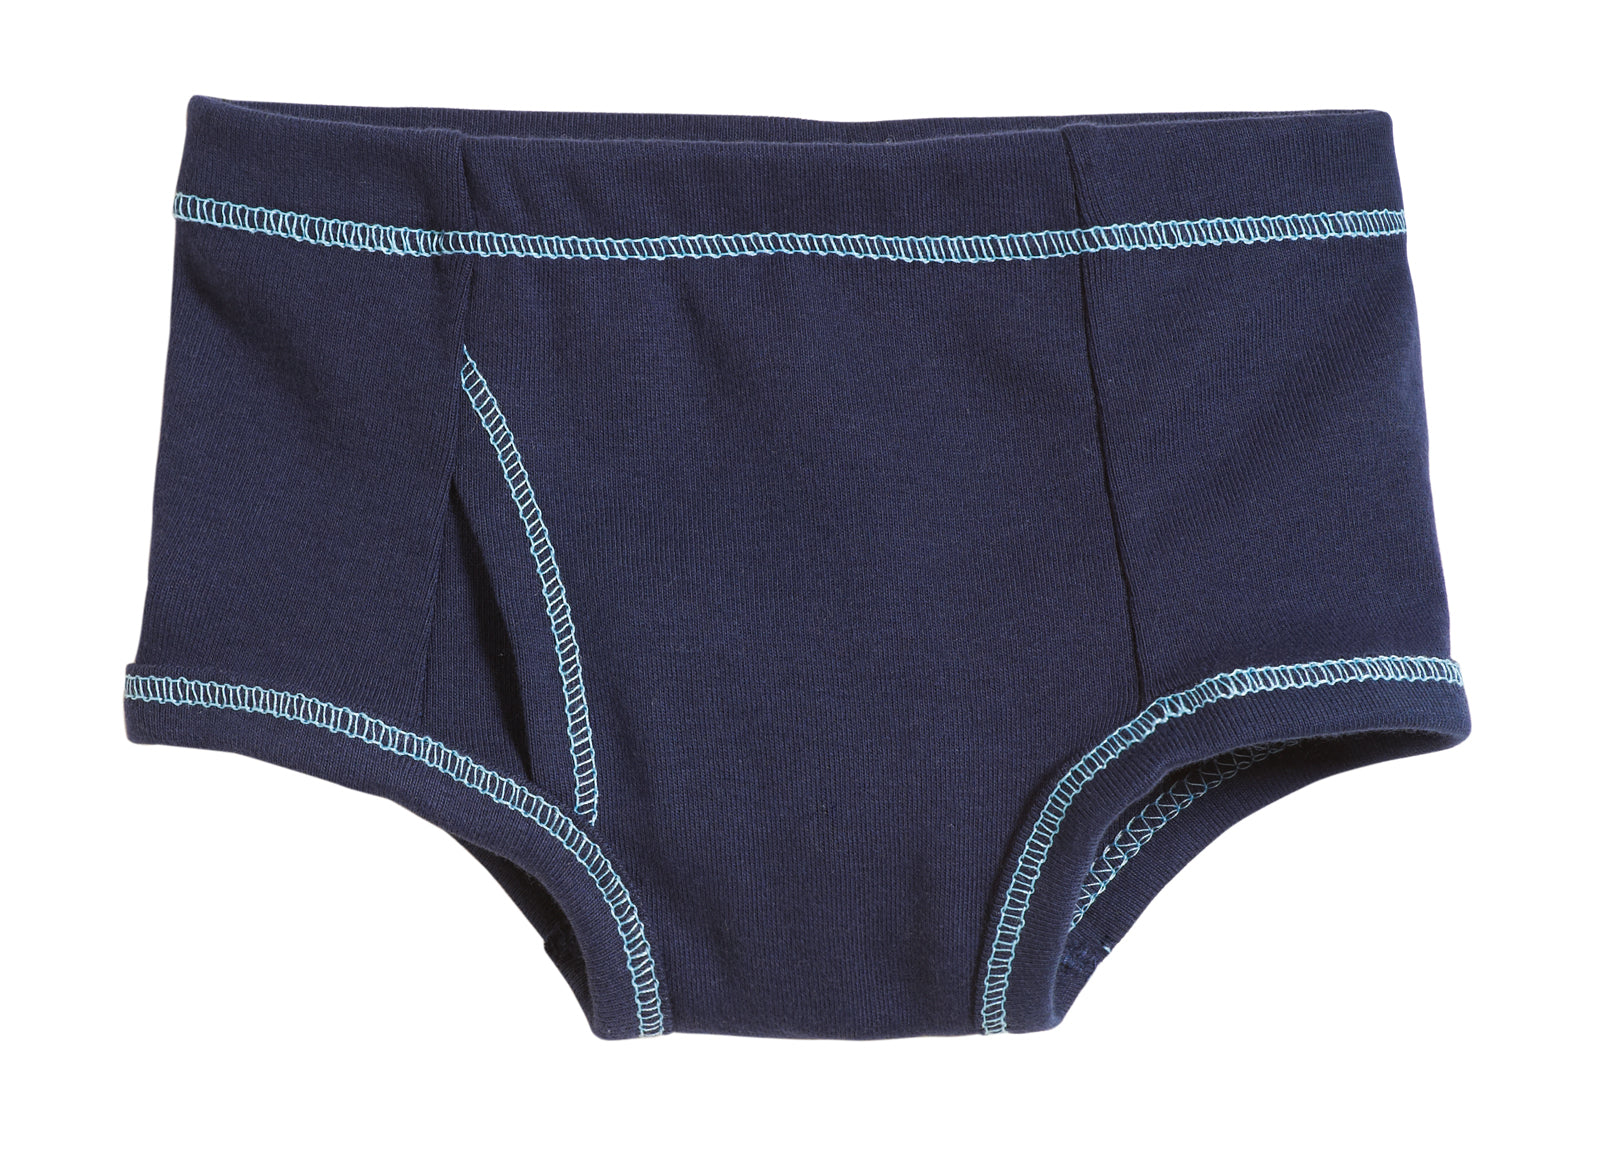 Blue Striped Cotton Cotton Briefs Mens For Boys Kids Shorts Underpanties  For Ages 3 14 OMGosh 211122 From Kong06, $11.6